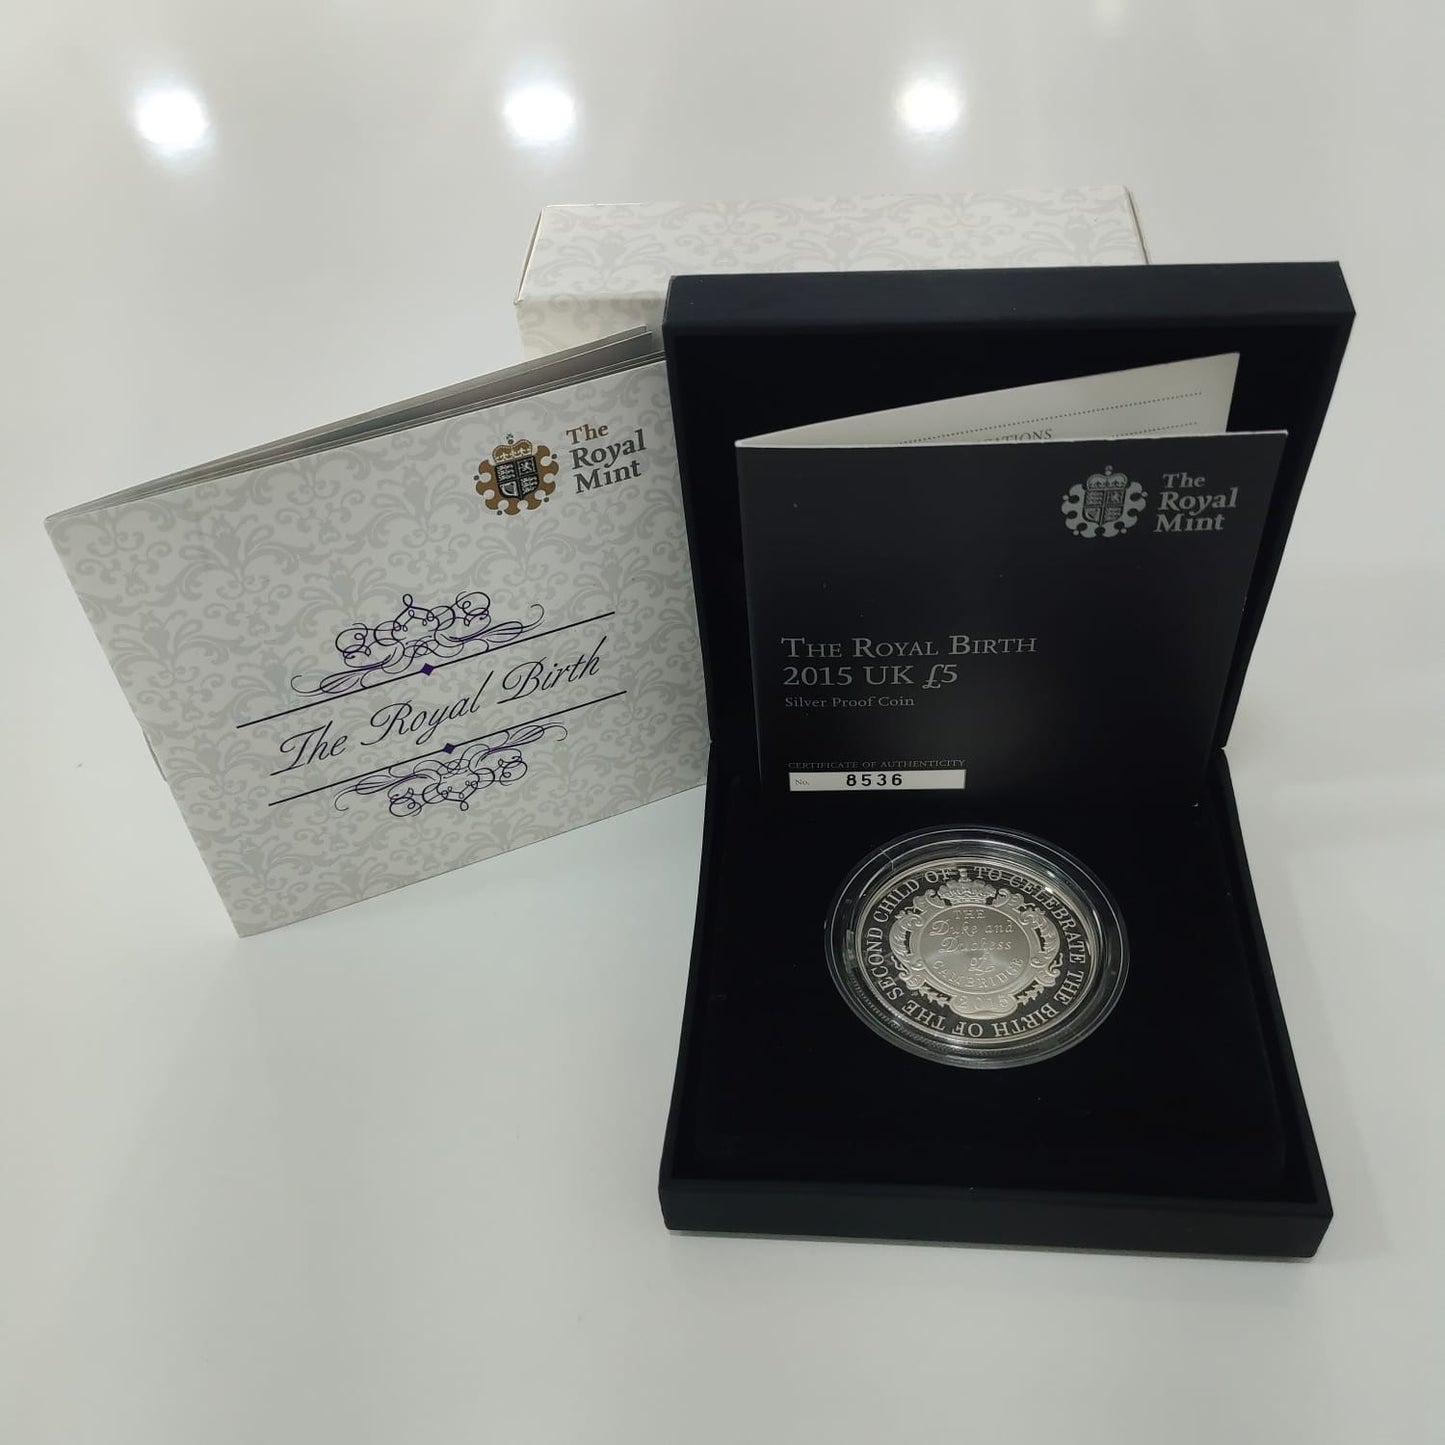 The Royal Birth 2015 United Kingdom £5 Silver Proof Coin